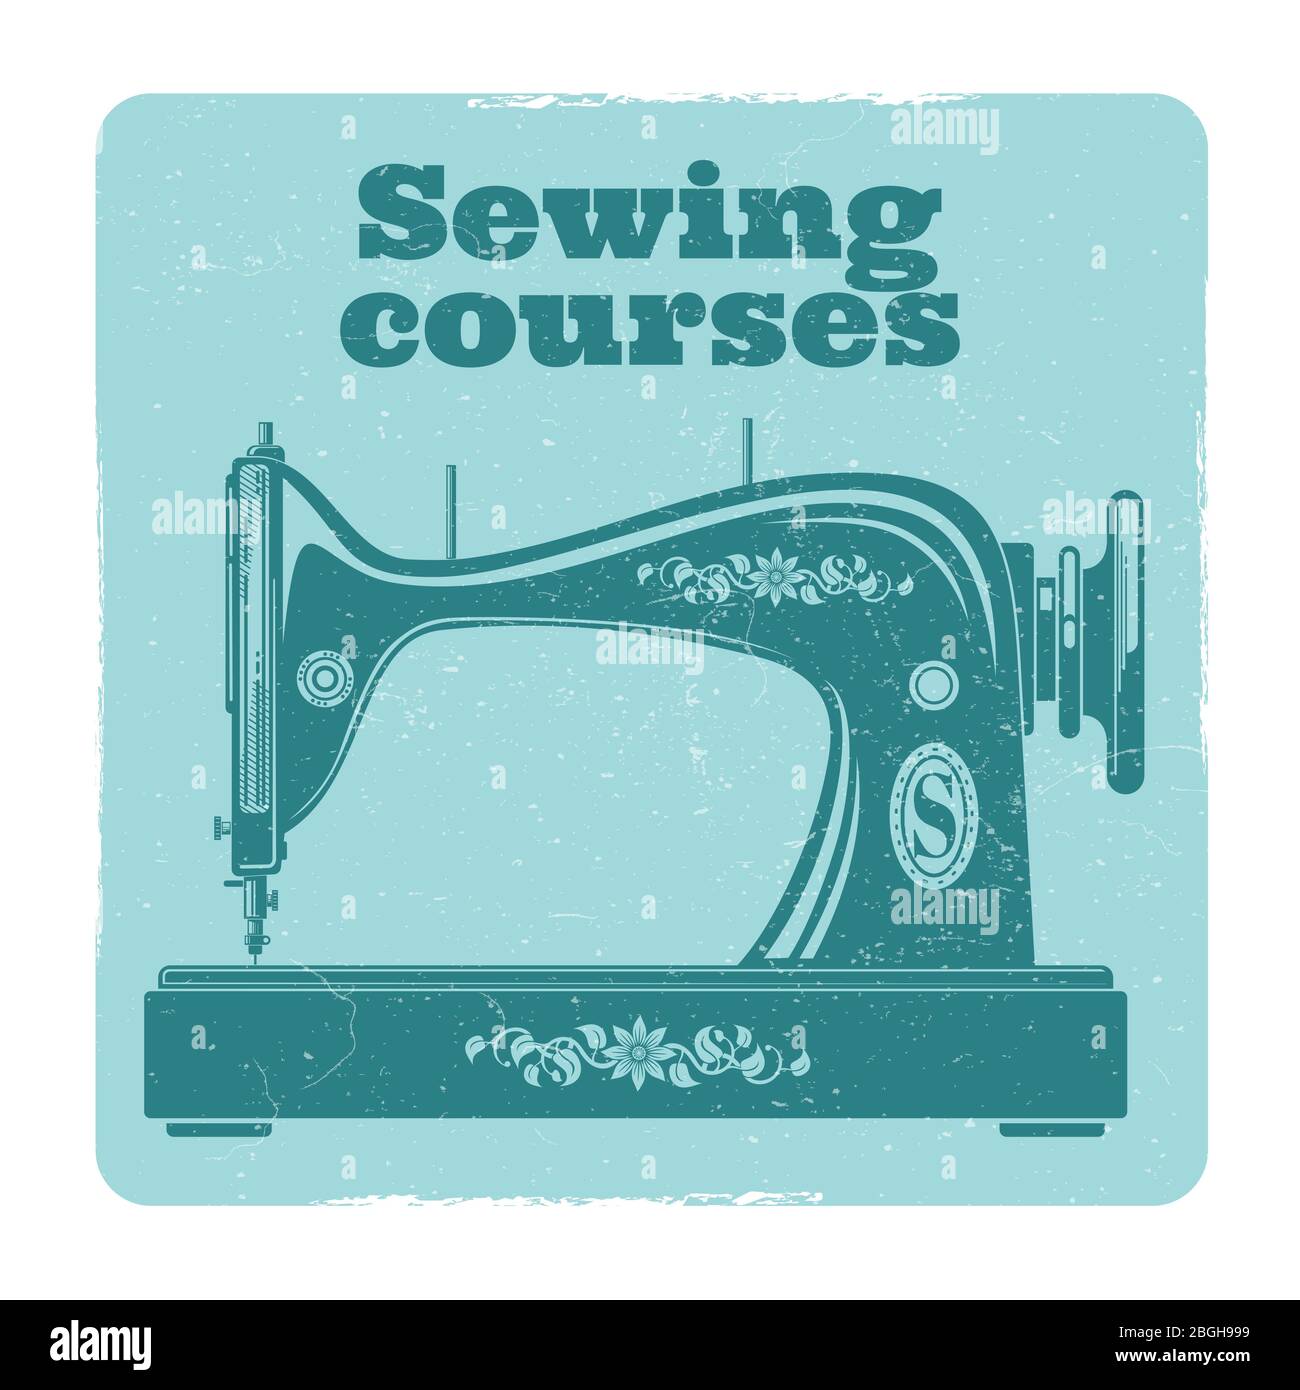 Sewing courses grunge vector label. Vintage sewing machine design. Vector illustration Stock Vector